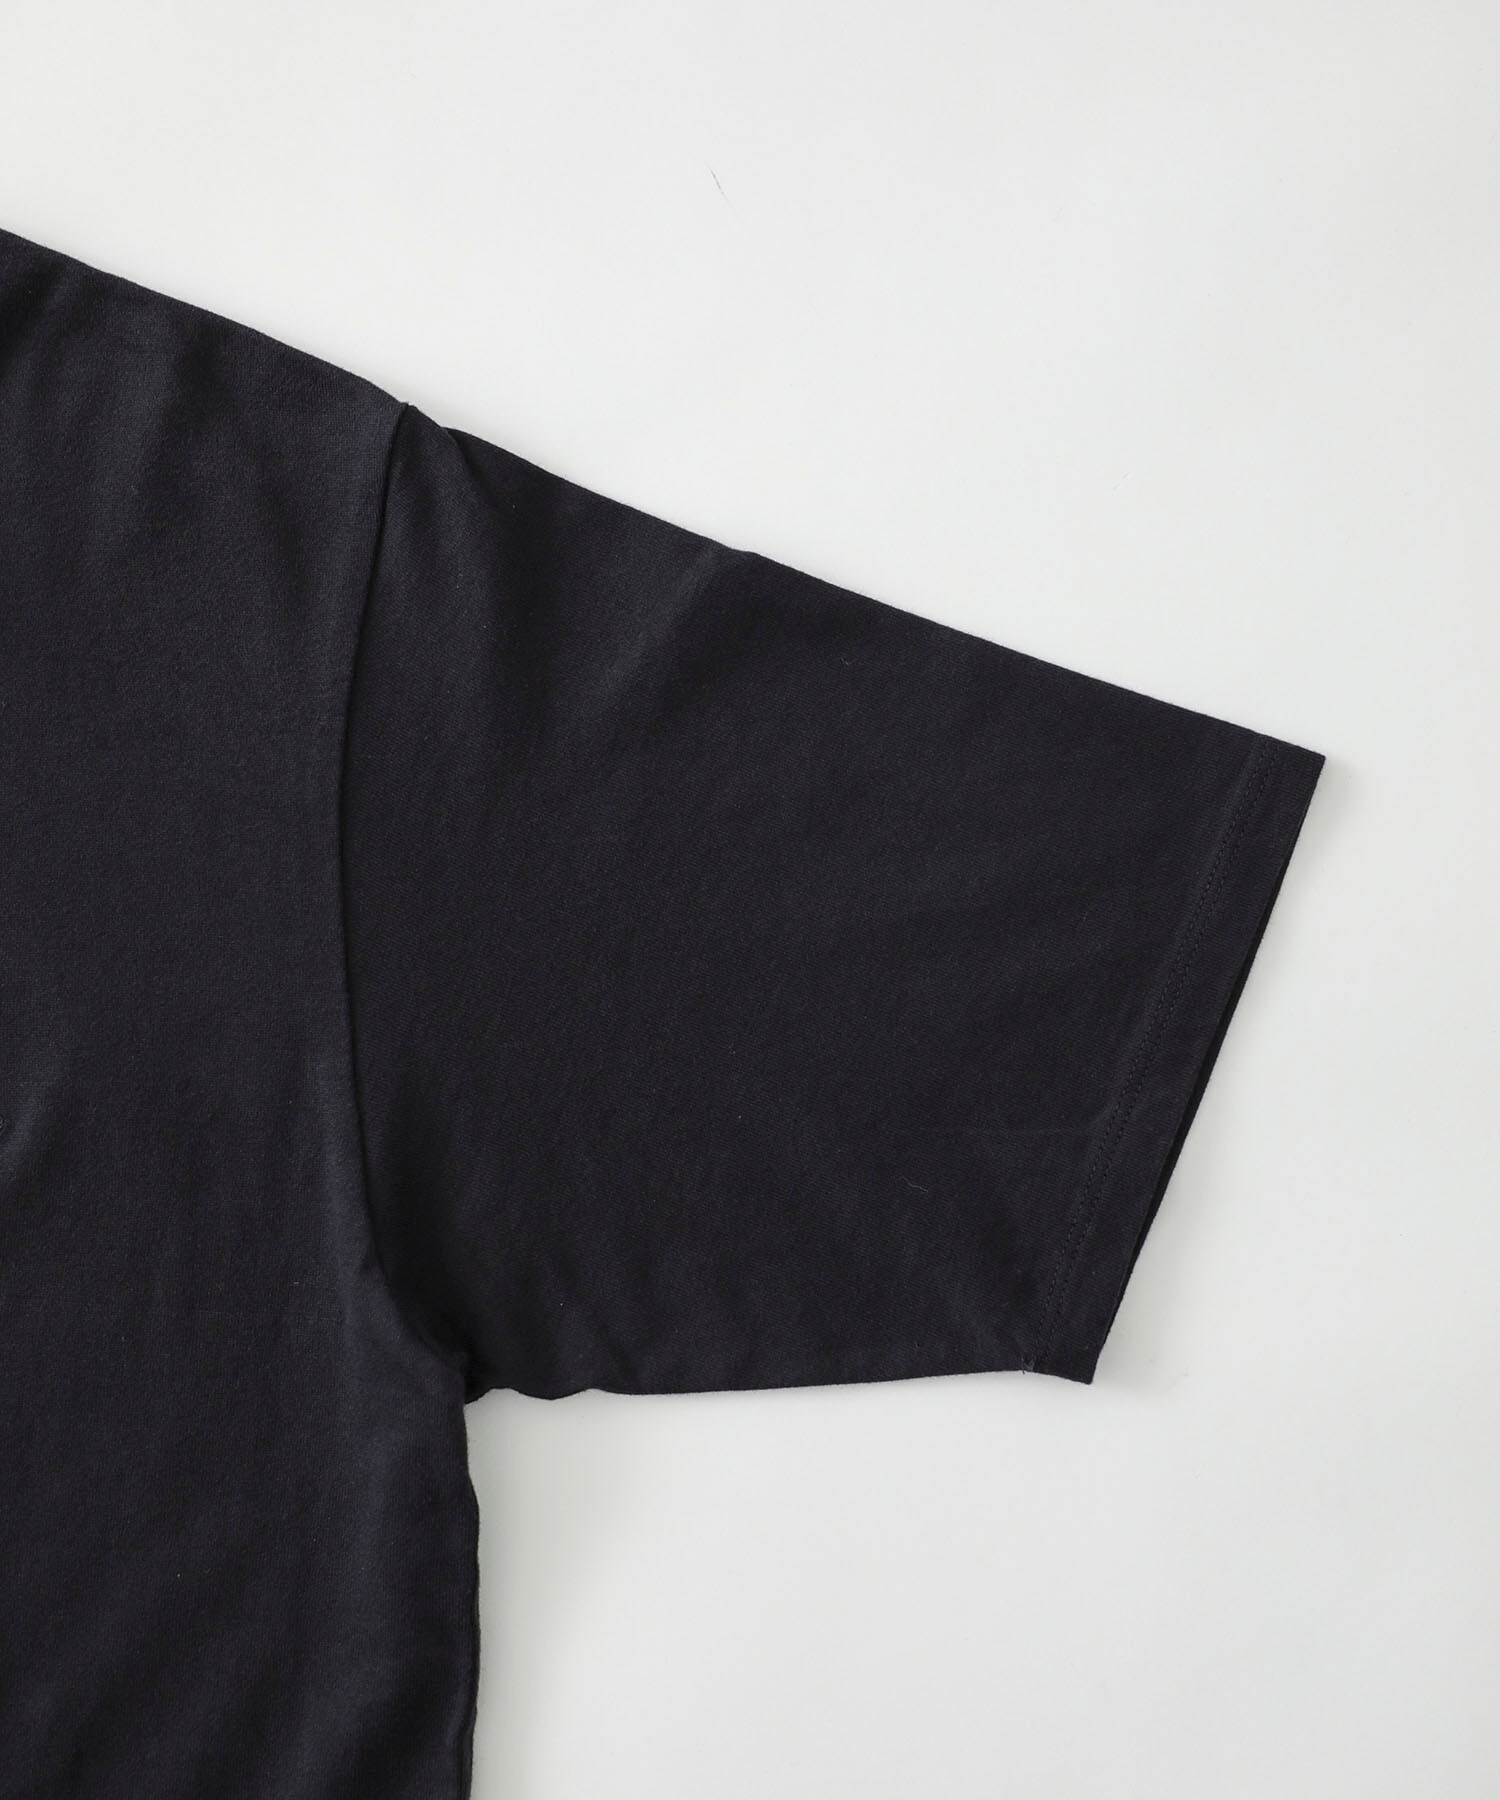 DWELLER S/S TEE 39 by LORD ECHO nonnative